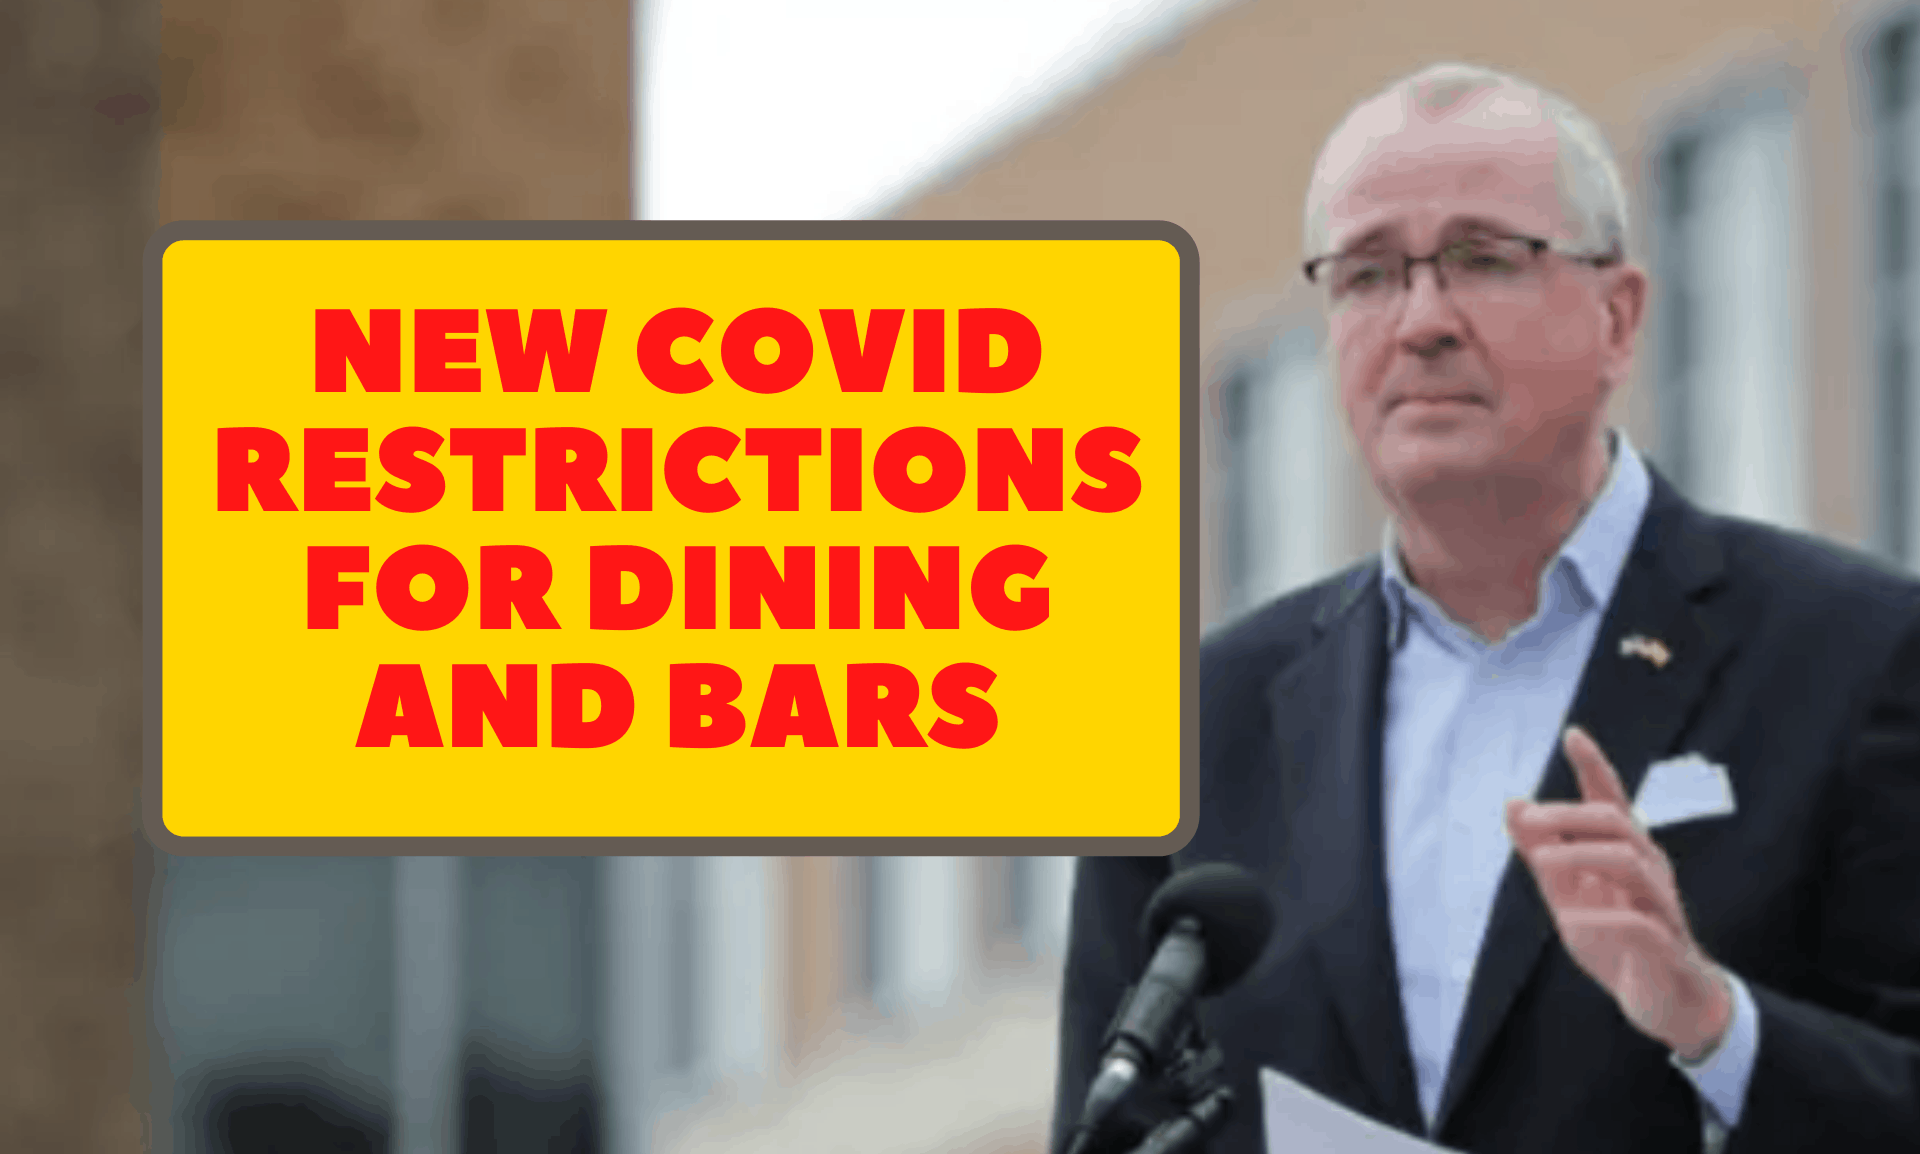 Gov. Murphy Introduces New Covid Restrictions For Dining And Bars